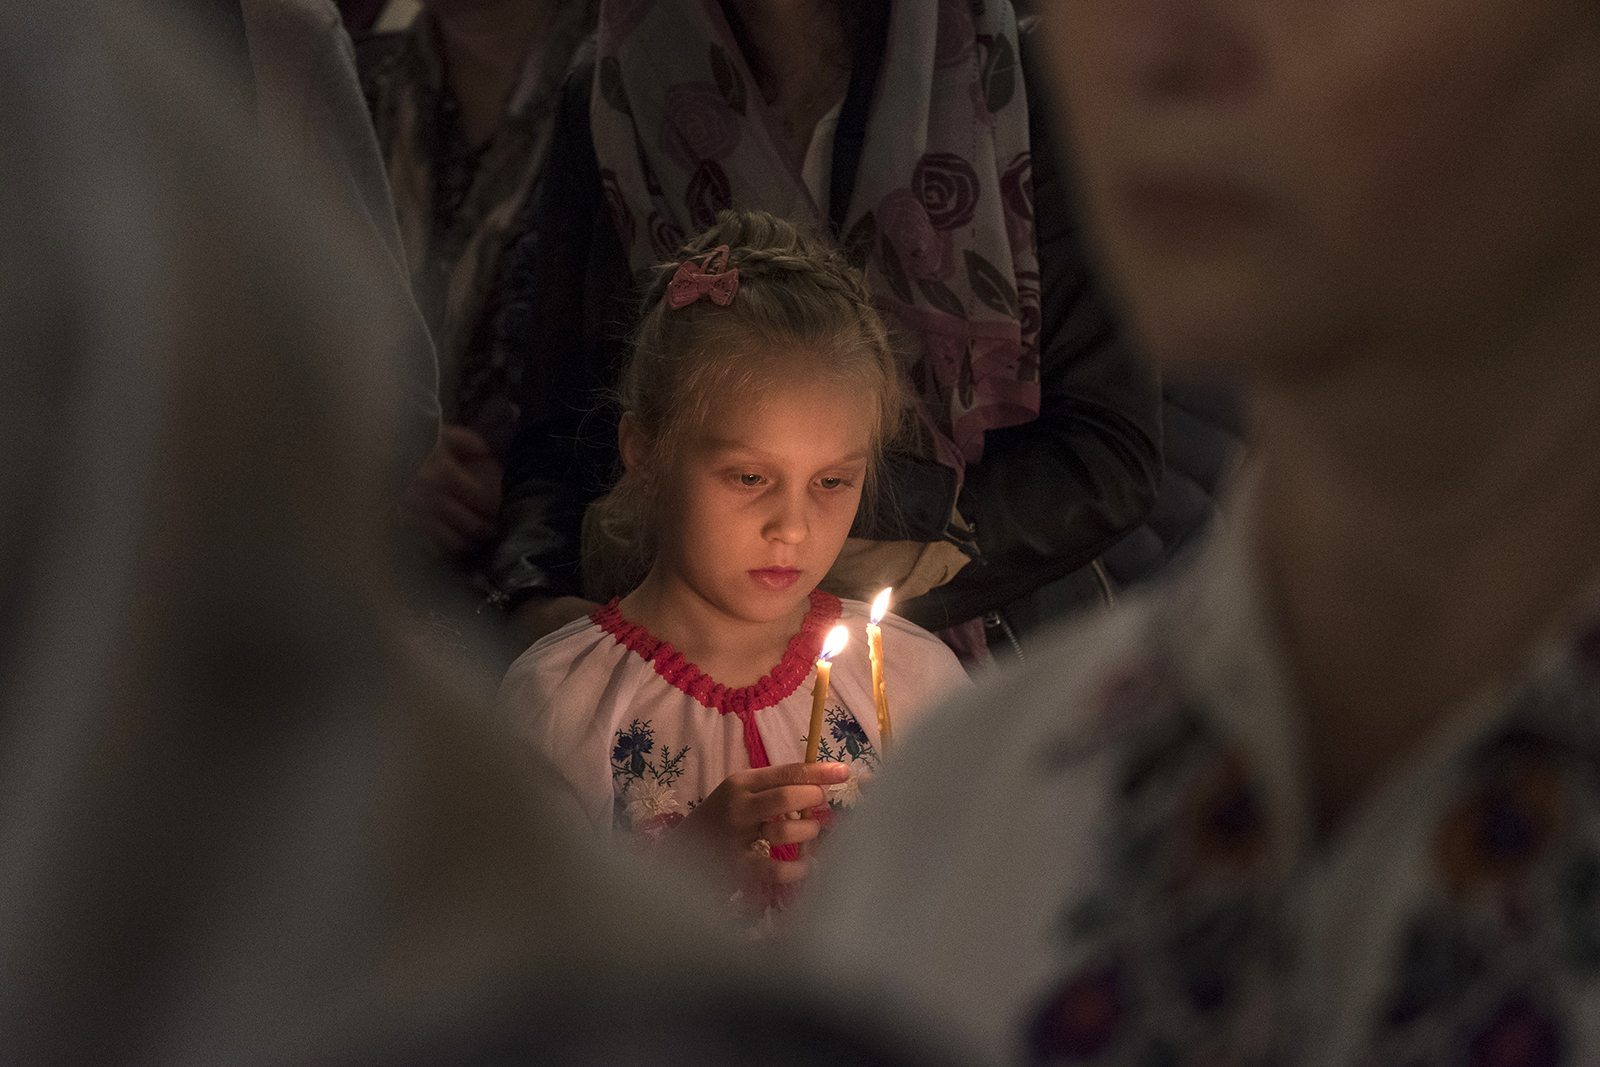 A young girl dressed in traditional Ukrainian attire attends Orthodox Easter Mass, Sunday, April 24, 2022, in Bucharest, Romania. RNS photo by Alexandra Radu